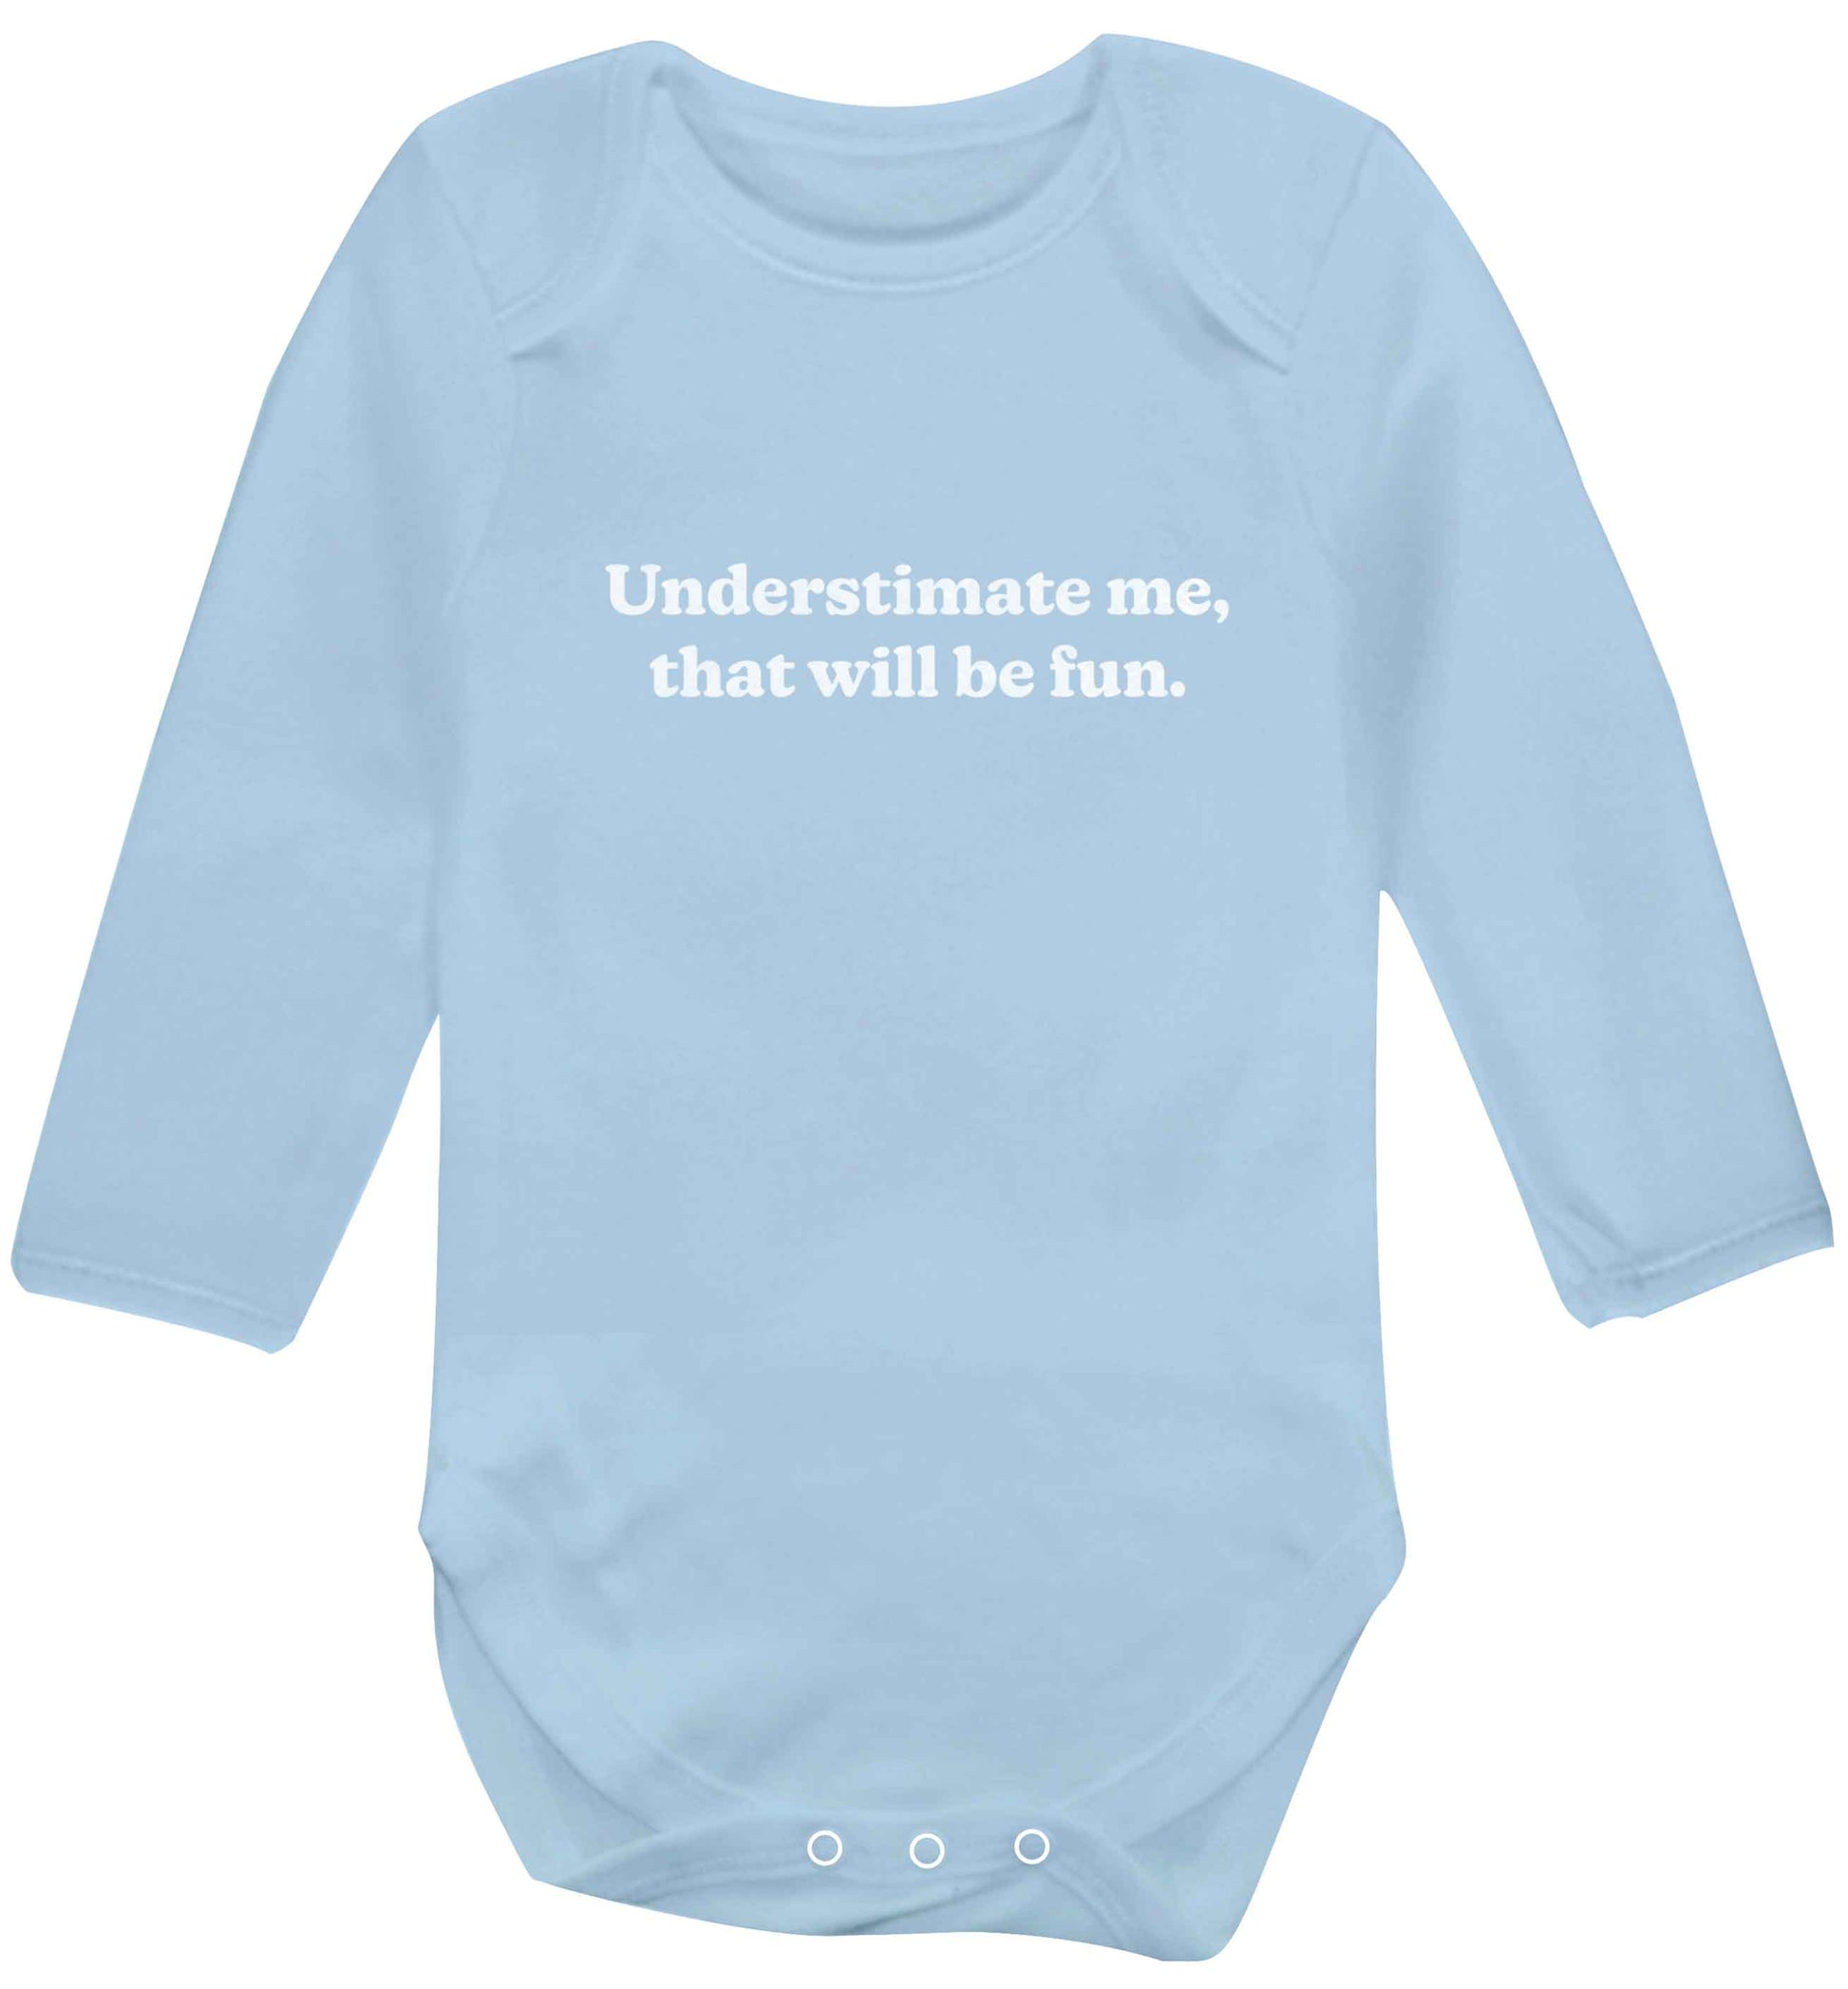 Underestimate me that will be fun baby vest long sleeved pale blue 6-12 months